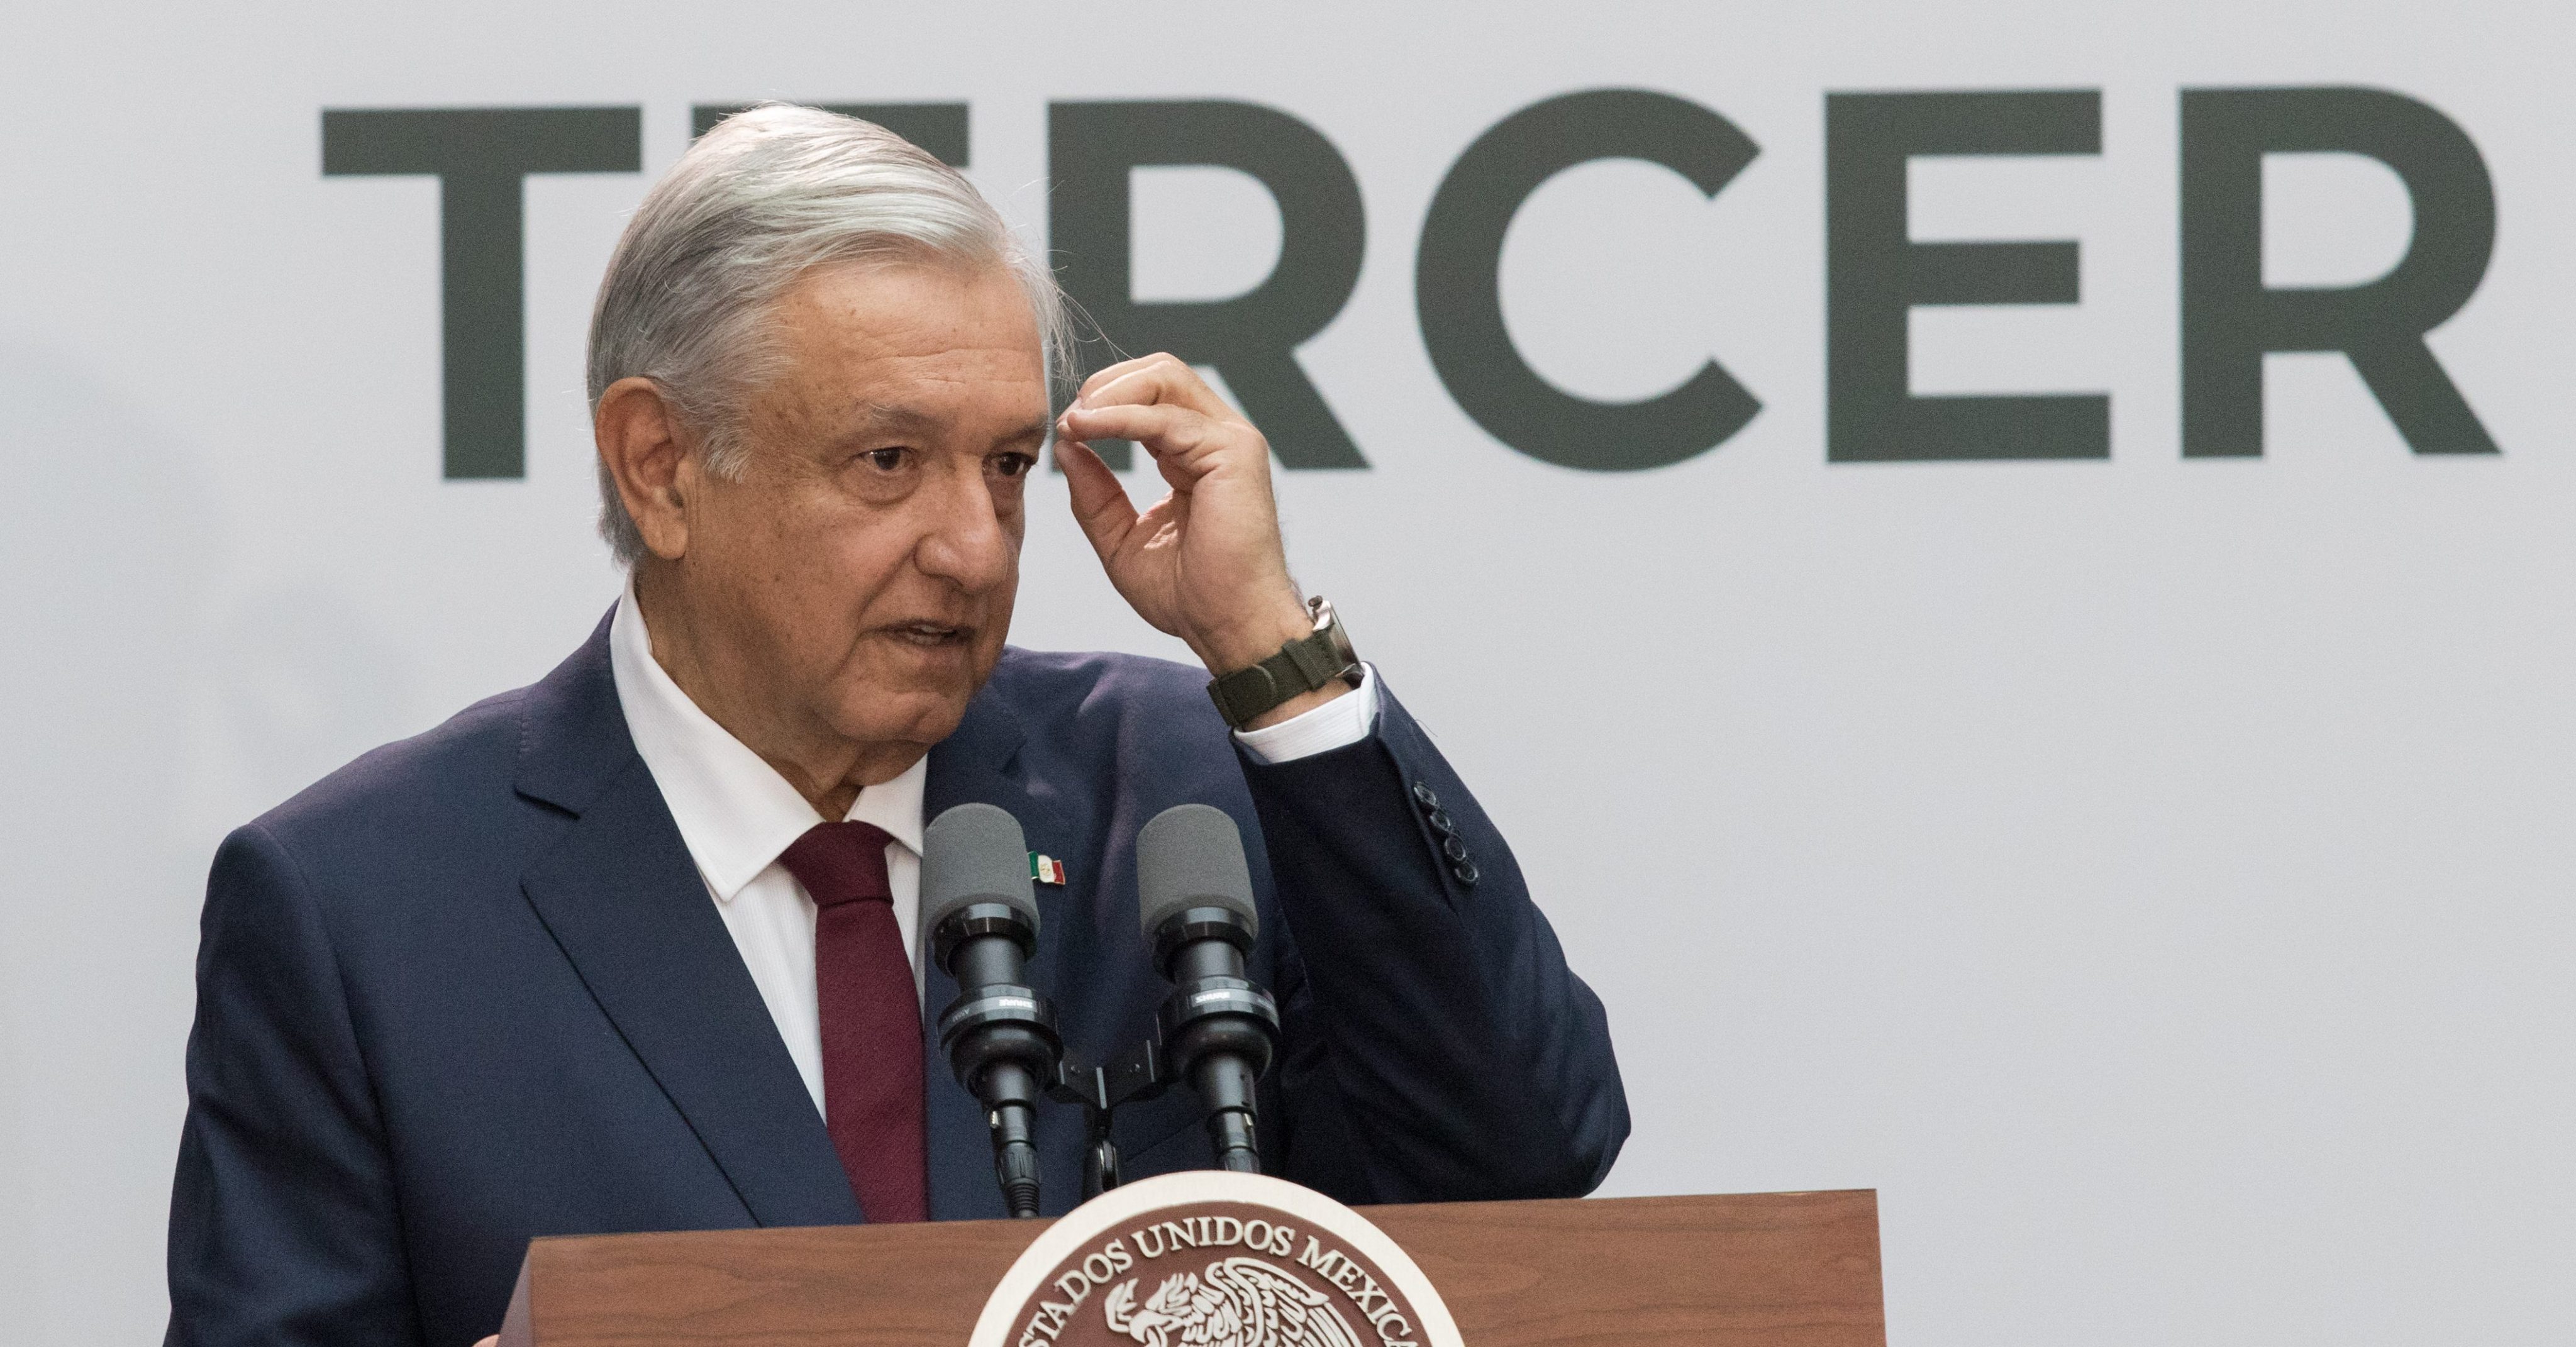 Figures and actions from the AMLO Report that cannot be verified